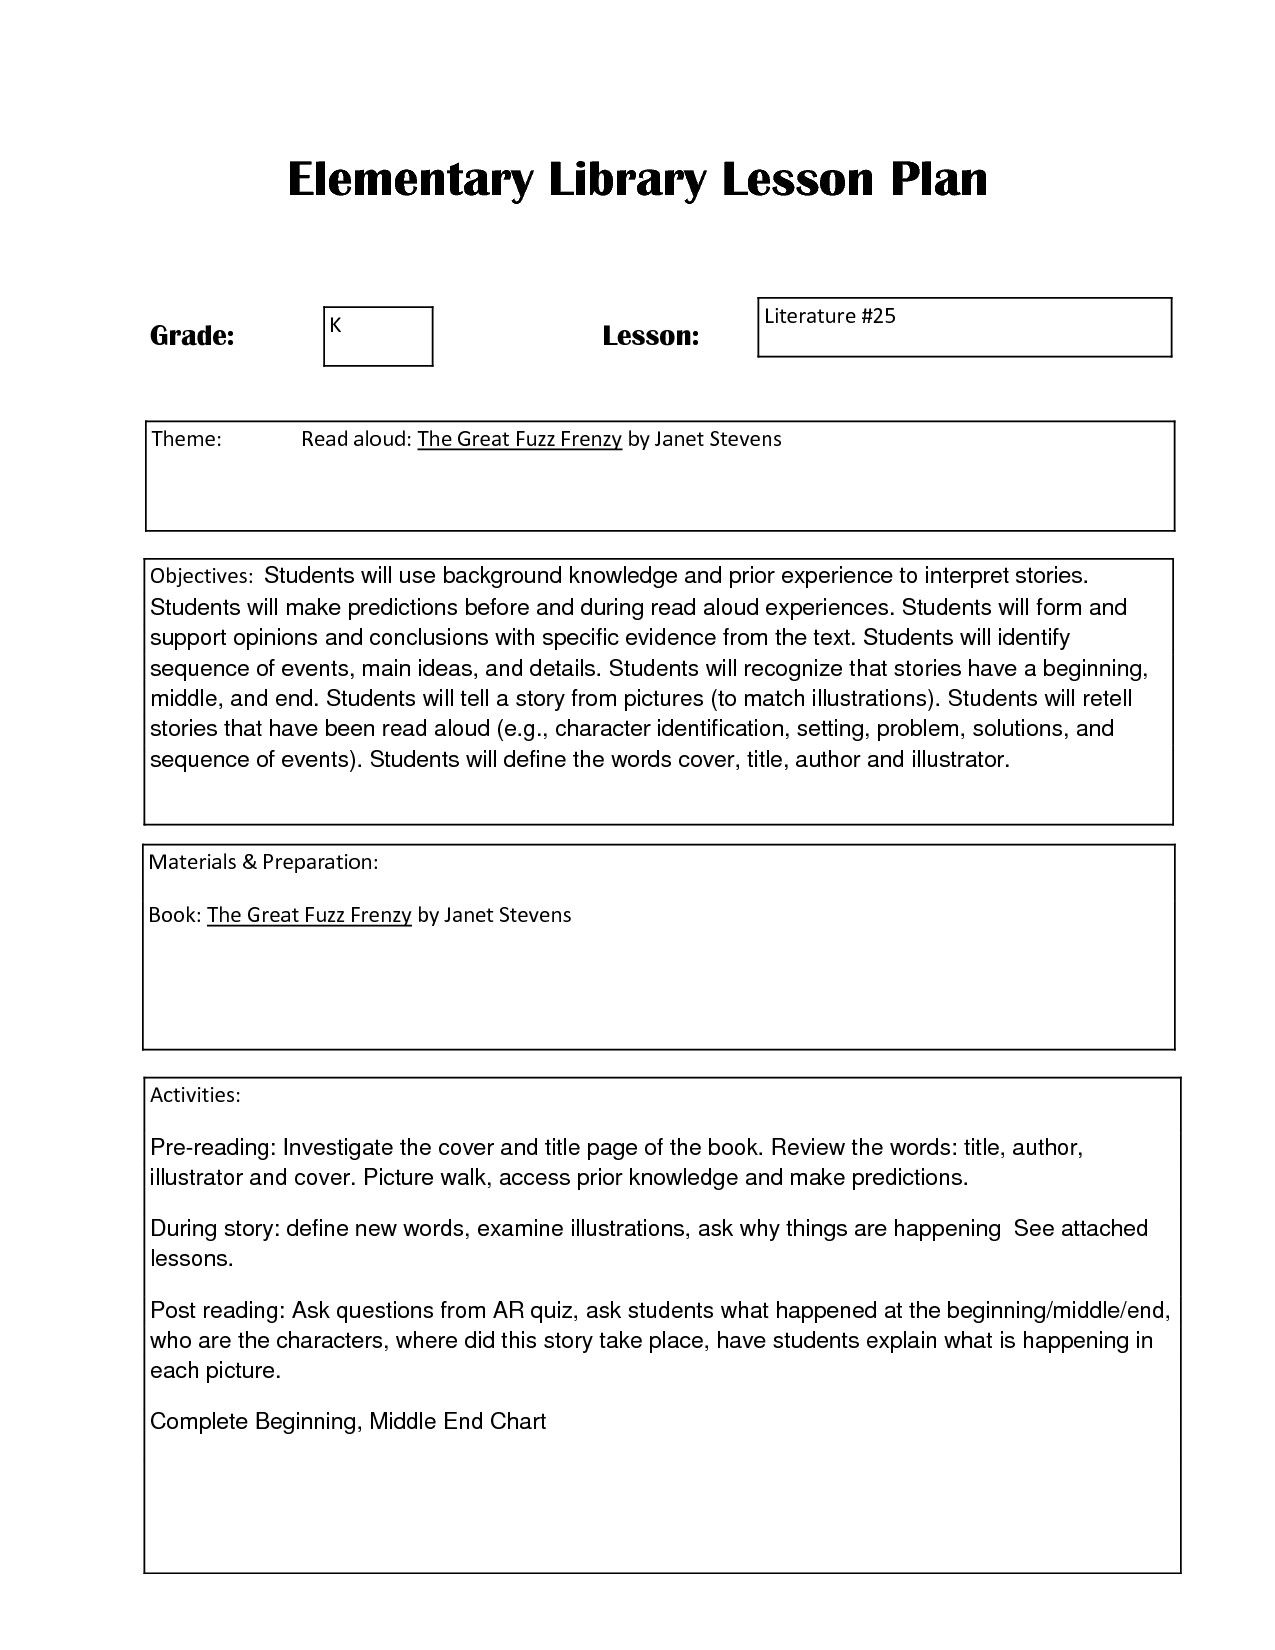 Lesson Plan Sample for Elementary Elementary Library Lesson Plan Templates